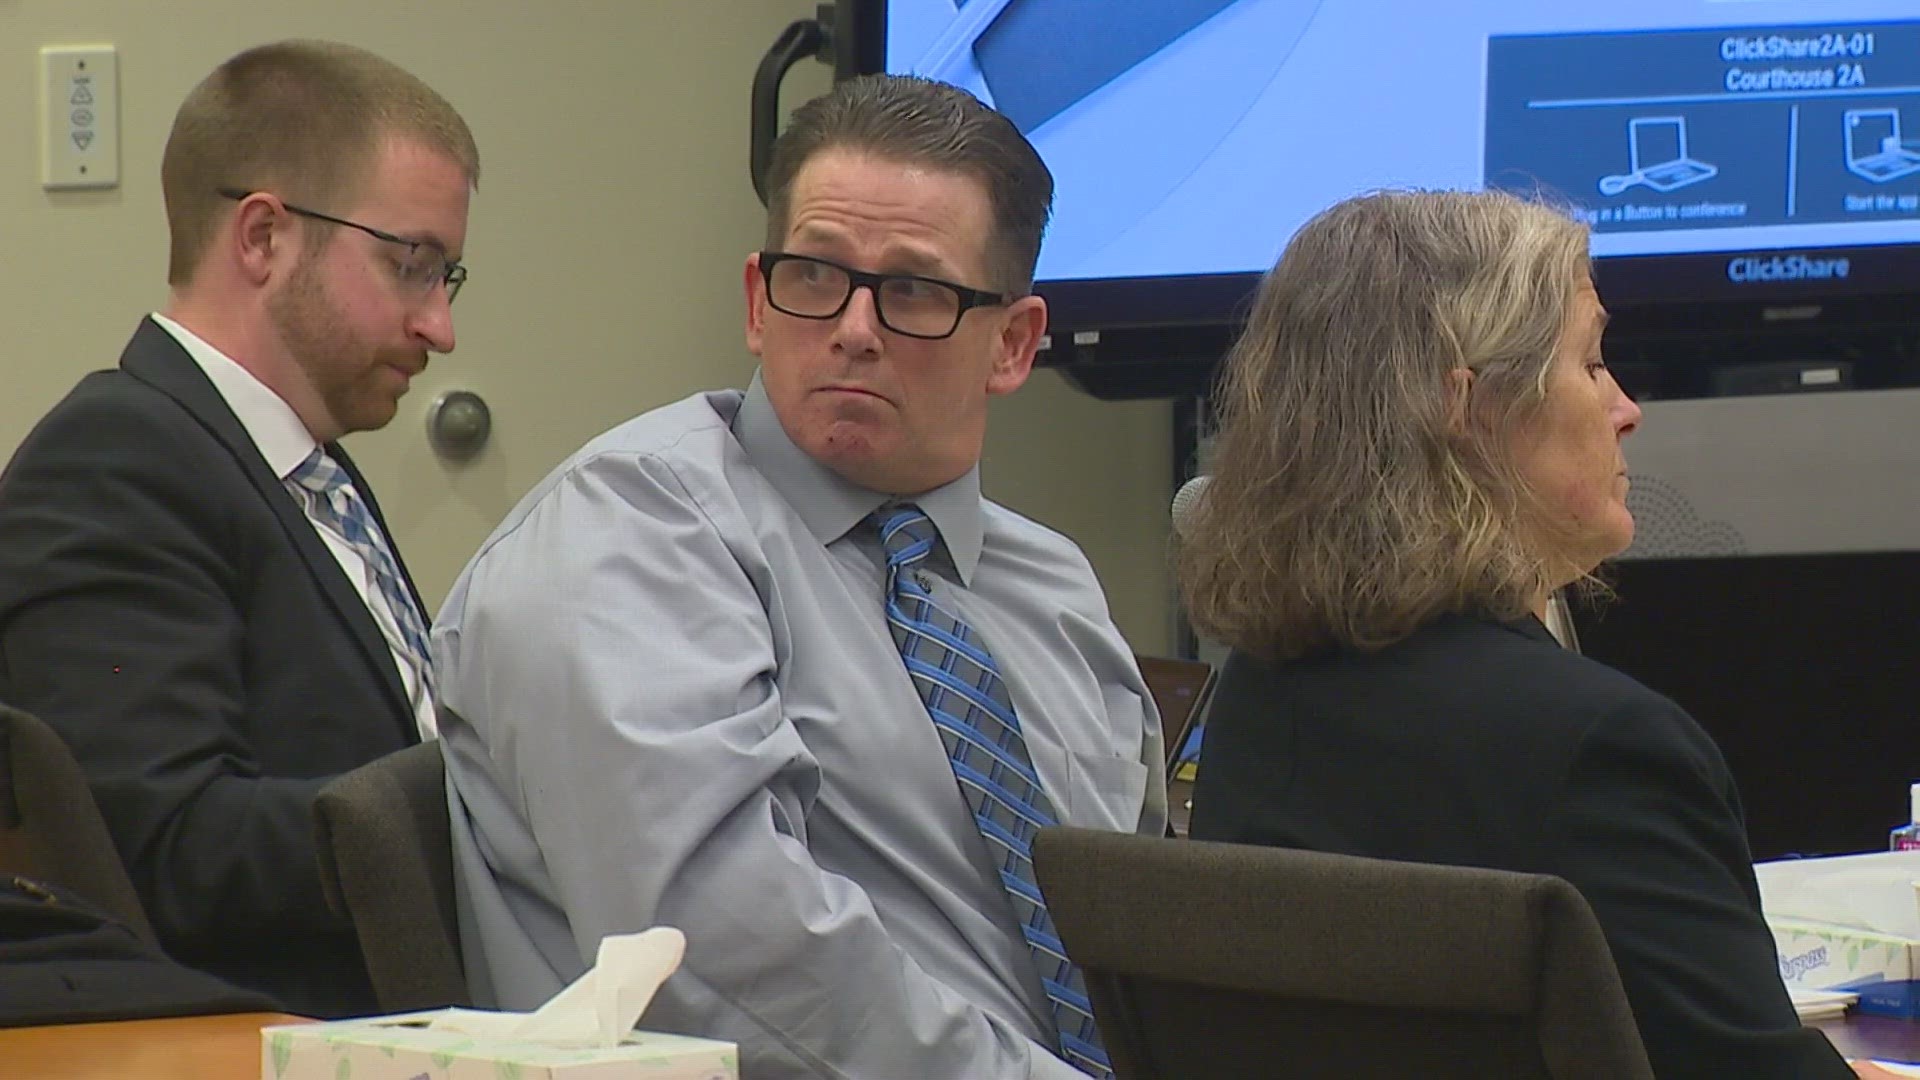 If convicted, Richard Rotter faces life in prison without the possibility of parole.